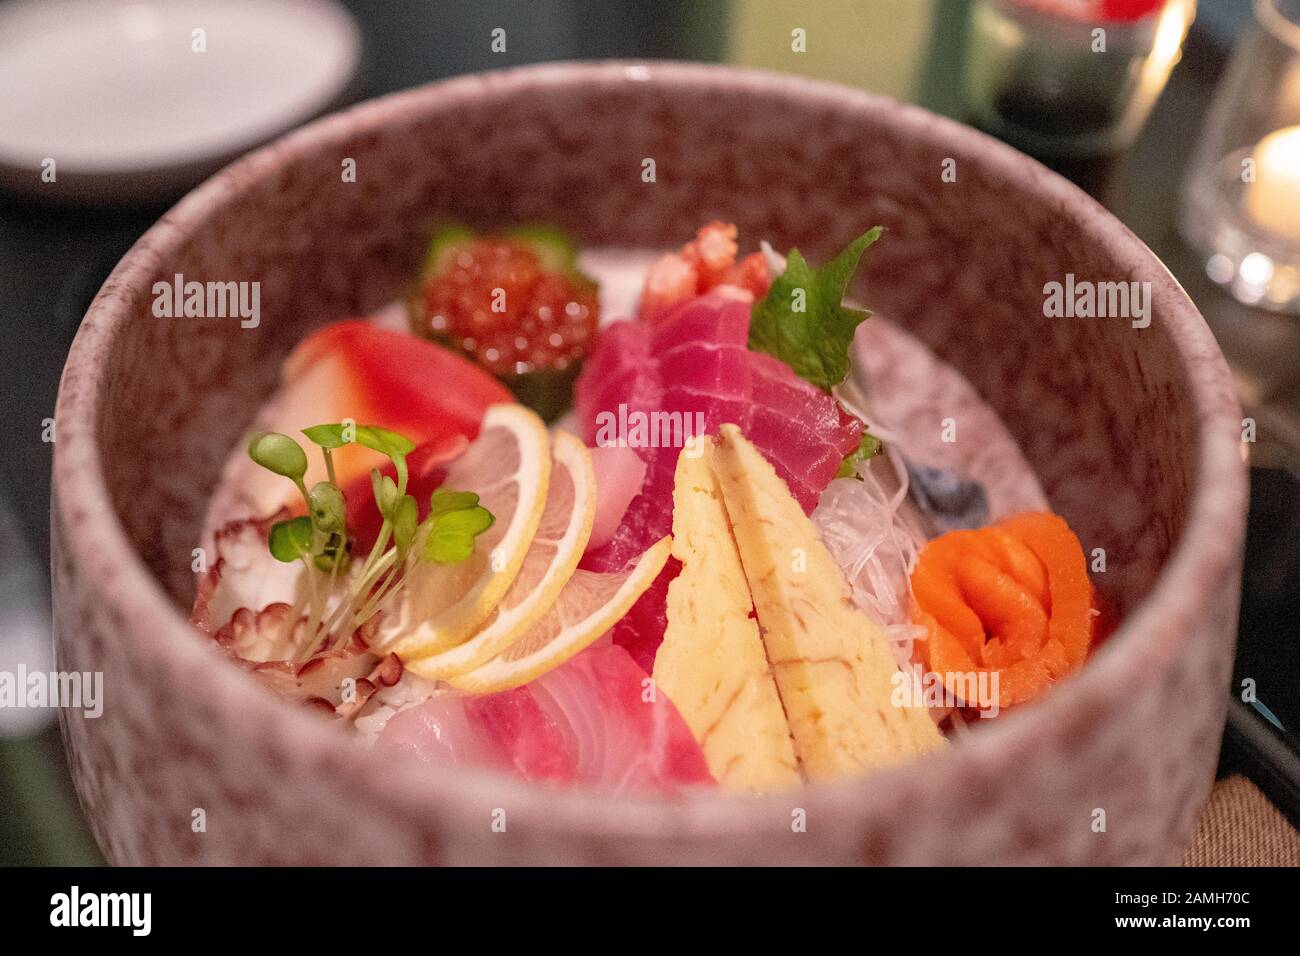 https://c8.alamy.com/comp/2AMH70C/chirashi-bowl-during-grand-opening-event-at-bamboo-sushi-an-environmentally-sustainable-restaurant-in-city-center-bishop-ranch-san-ramon-california-december-2019-bamboo-sushi-was-the-first-restaurant-to-be-certified-sustainable-by-the-green-restaurant-association-and-the-first-restaurant-to-gain-b-corp-status-2AMH70C.jpg